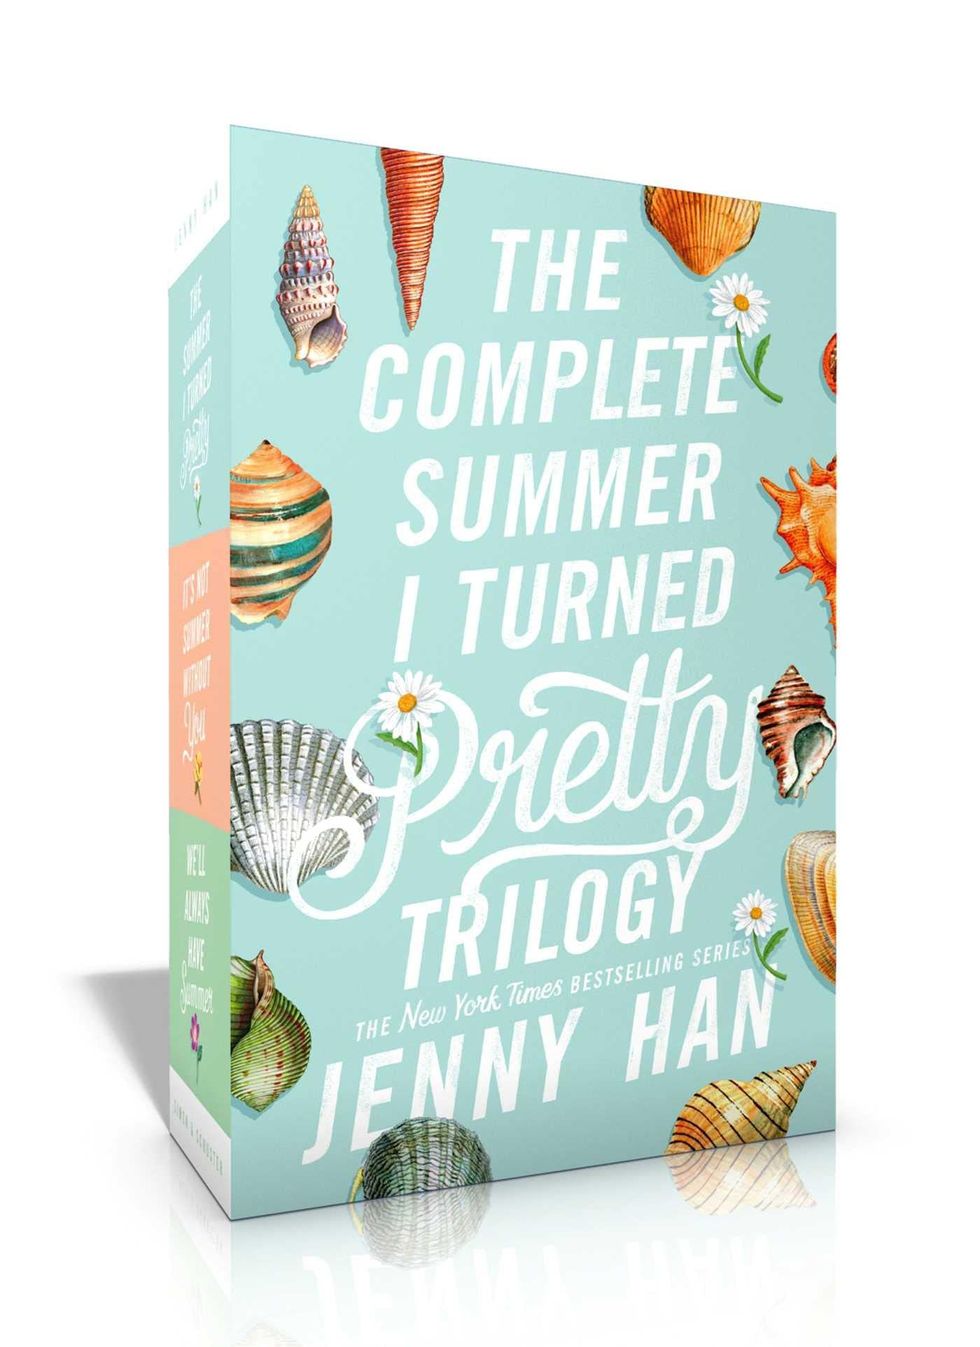 The Summer I Turned Pretty: A Book Review For Parents